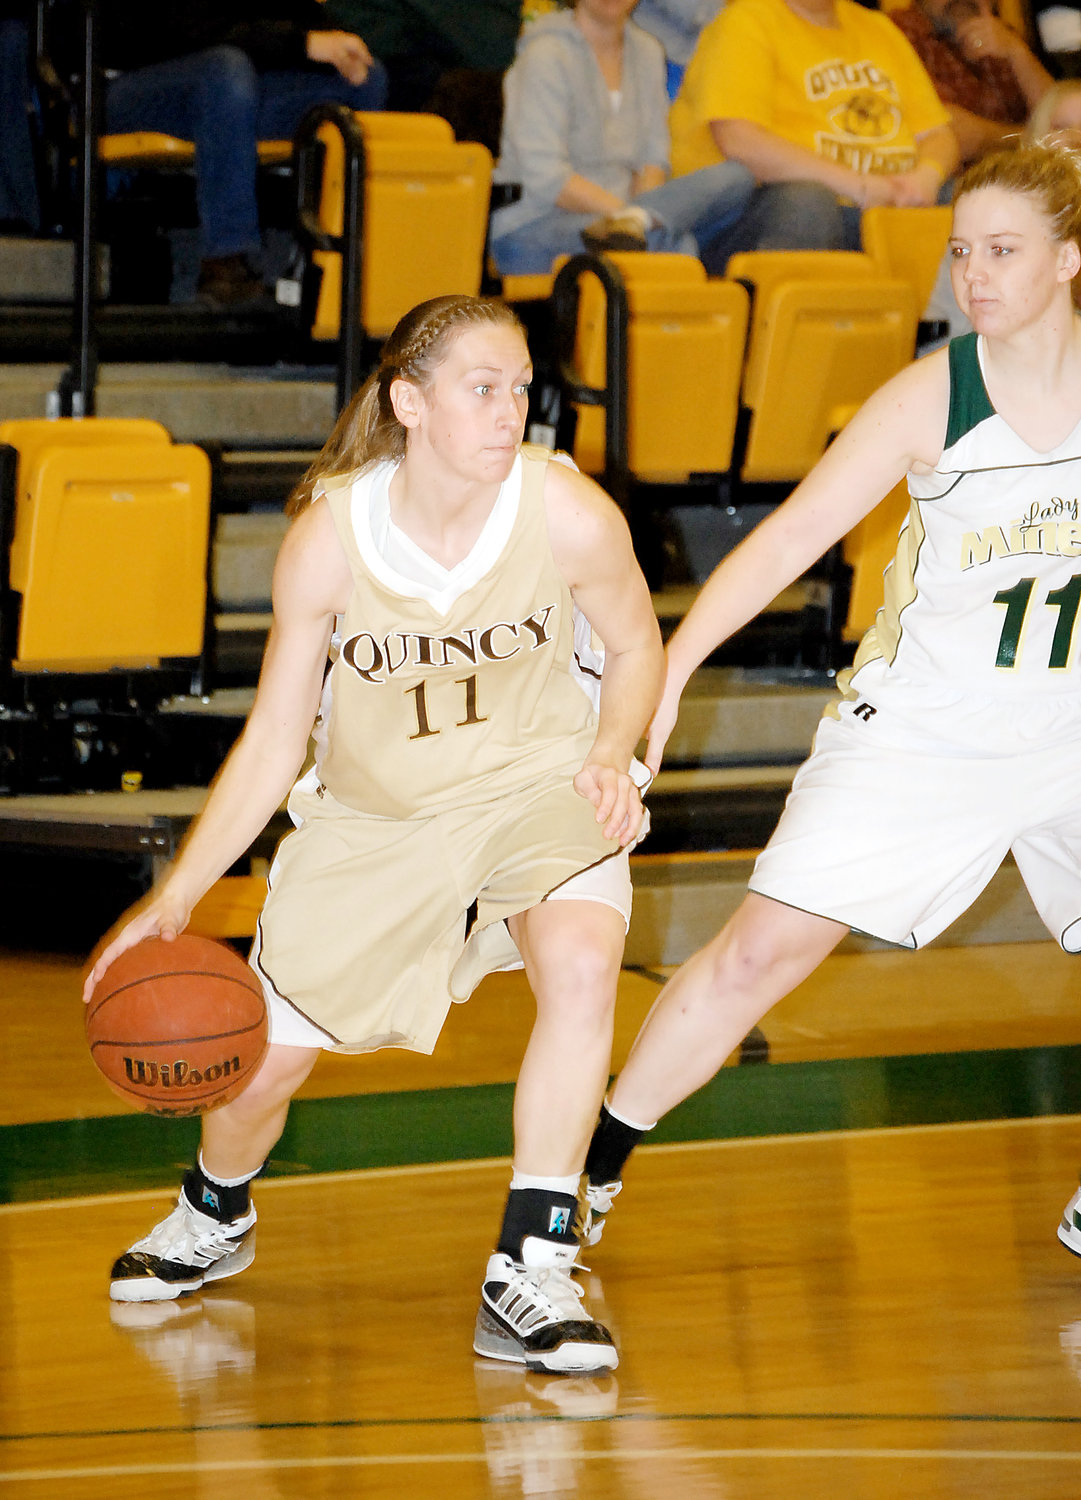 Jessica Keller played pressure defense for Quincy University’s Lady Hawks during her senior season of college basketball back in early 2009. Keller is shown playing for the Lady Hawks against the Missouri University Science and Technology (S & T) Lady Miners. Jessica is the daughter of Tom and Teresa Keller of Belle.